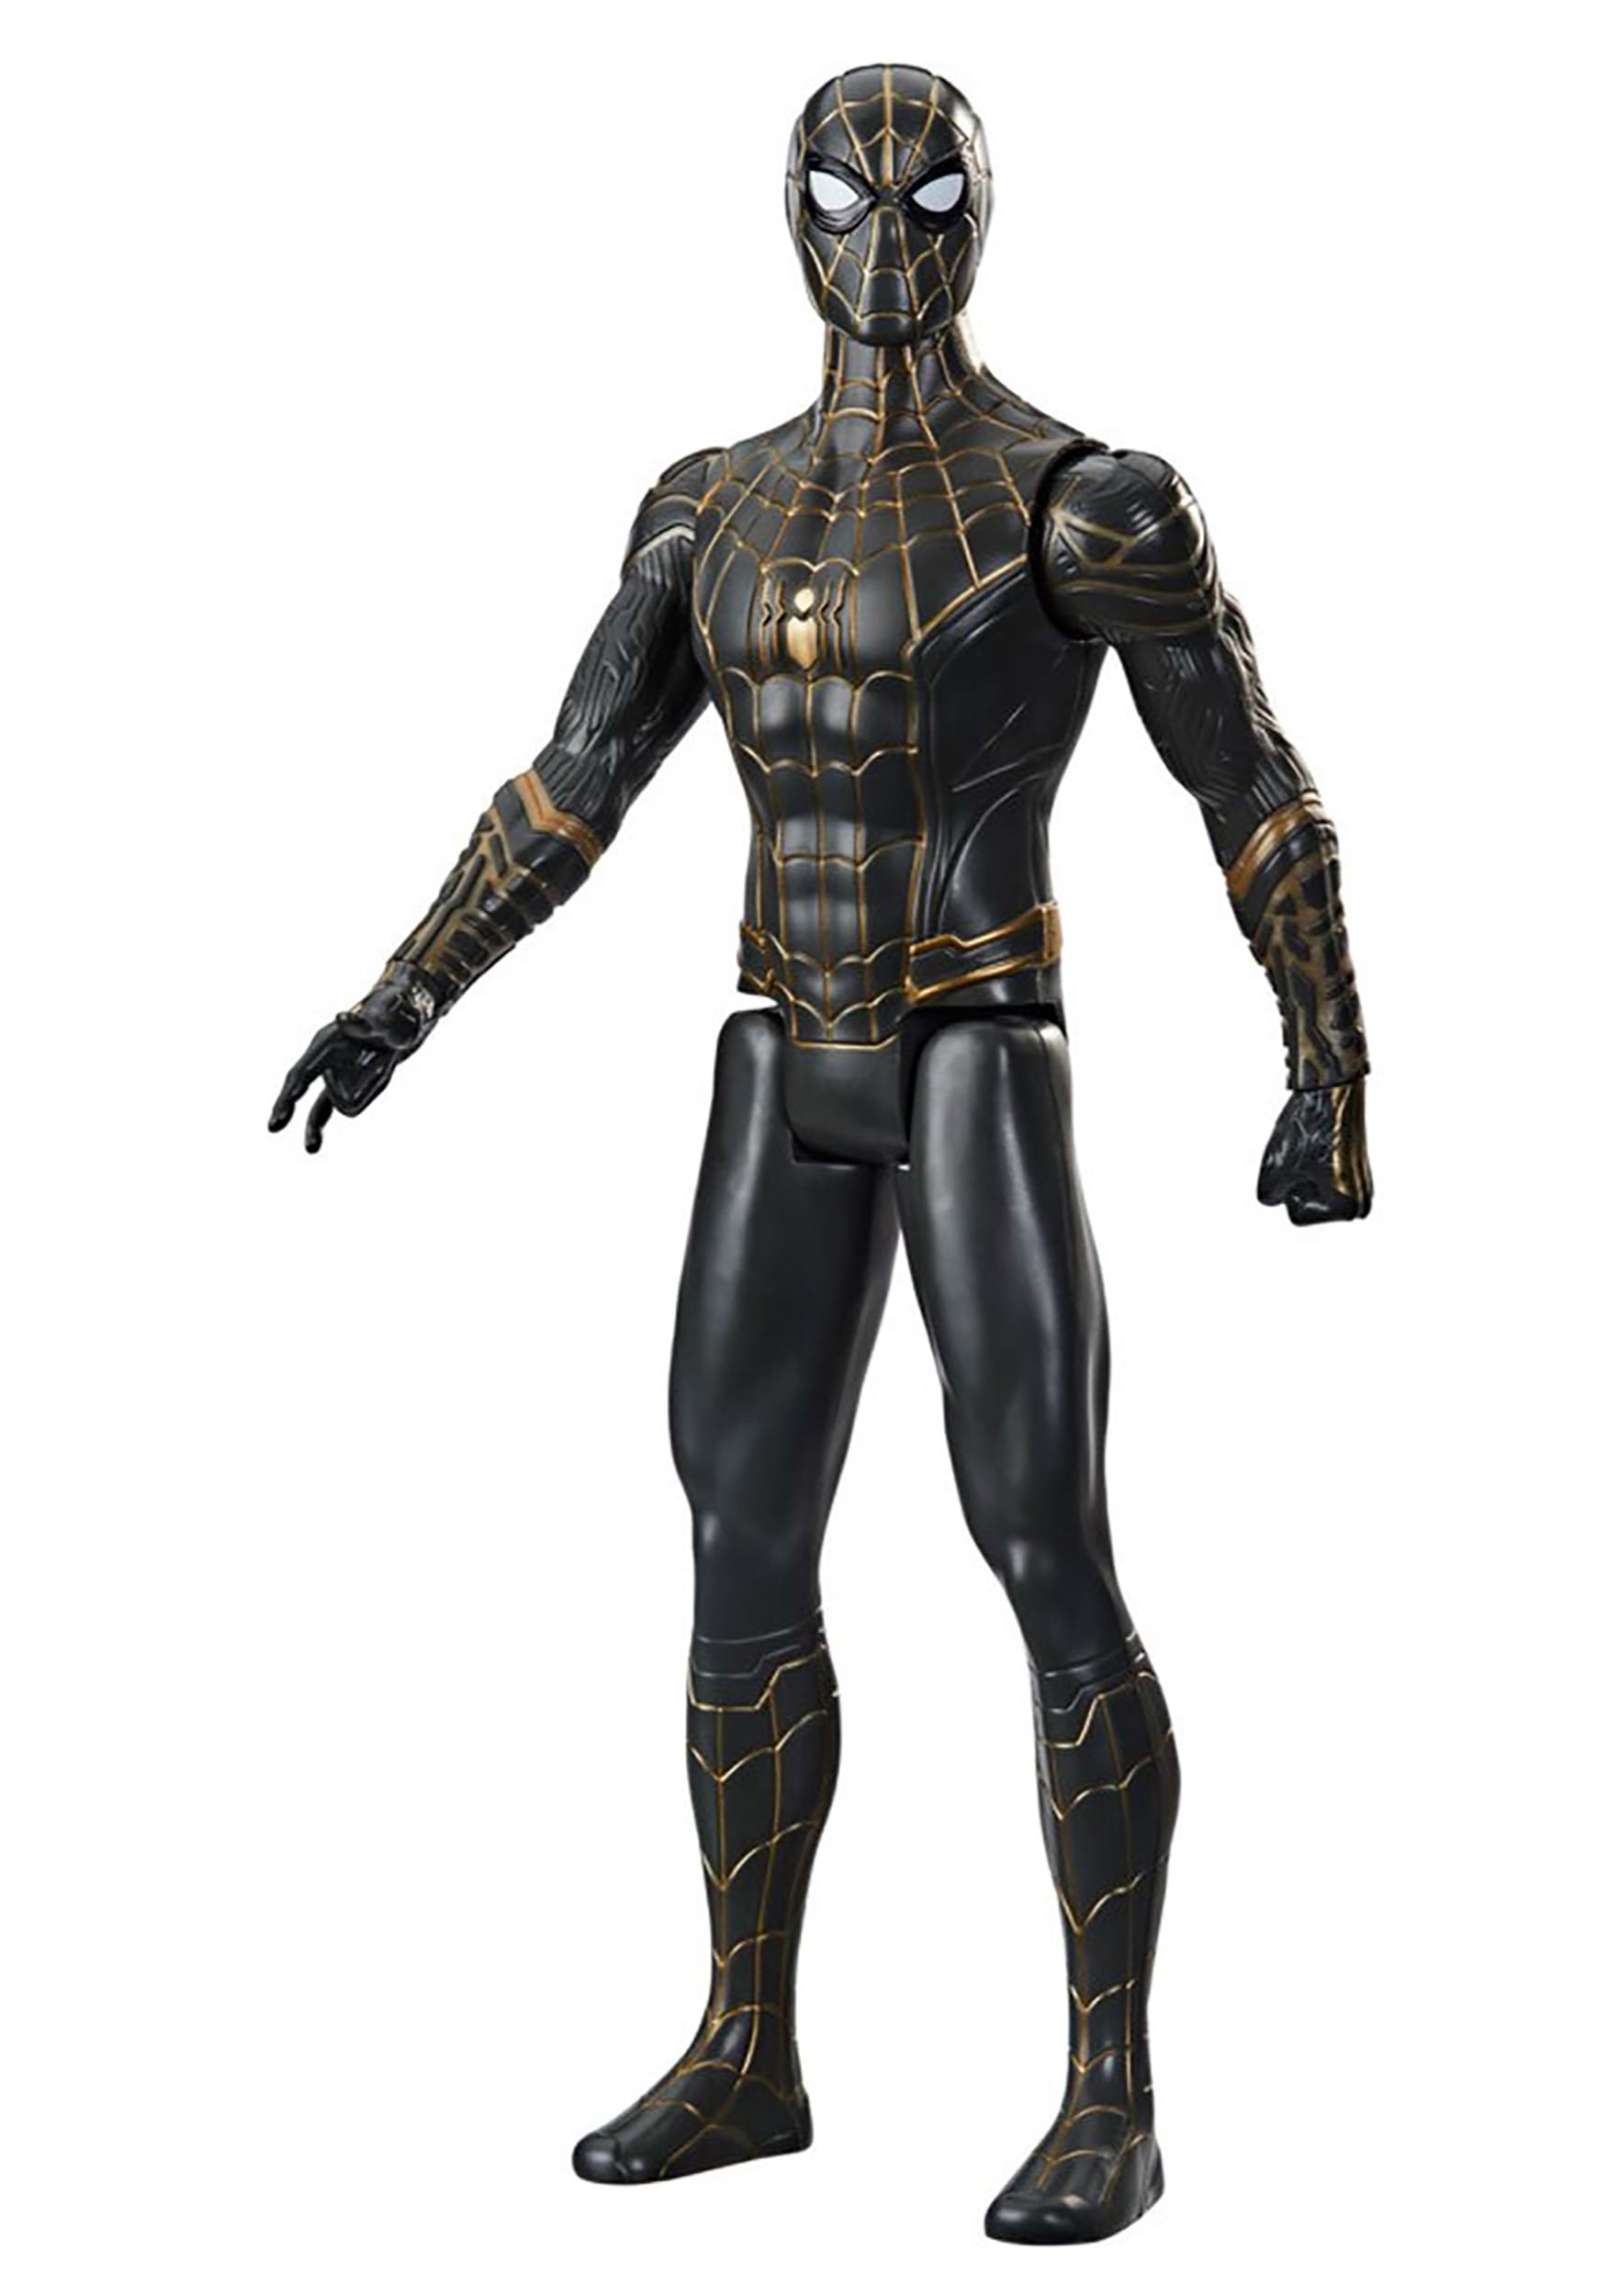 12 Inch Spider-Man Titan Hero Series Black And Gold Suit Figure